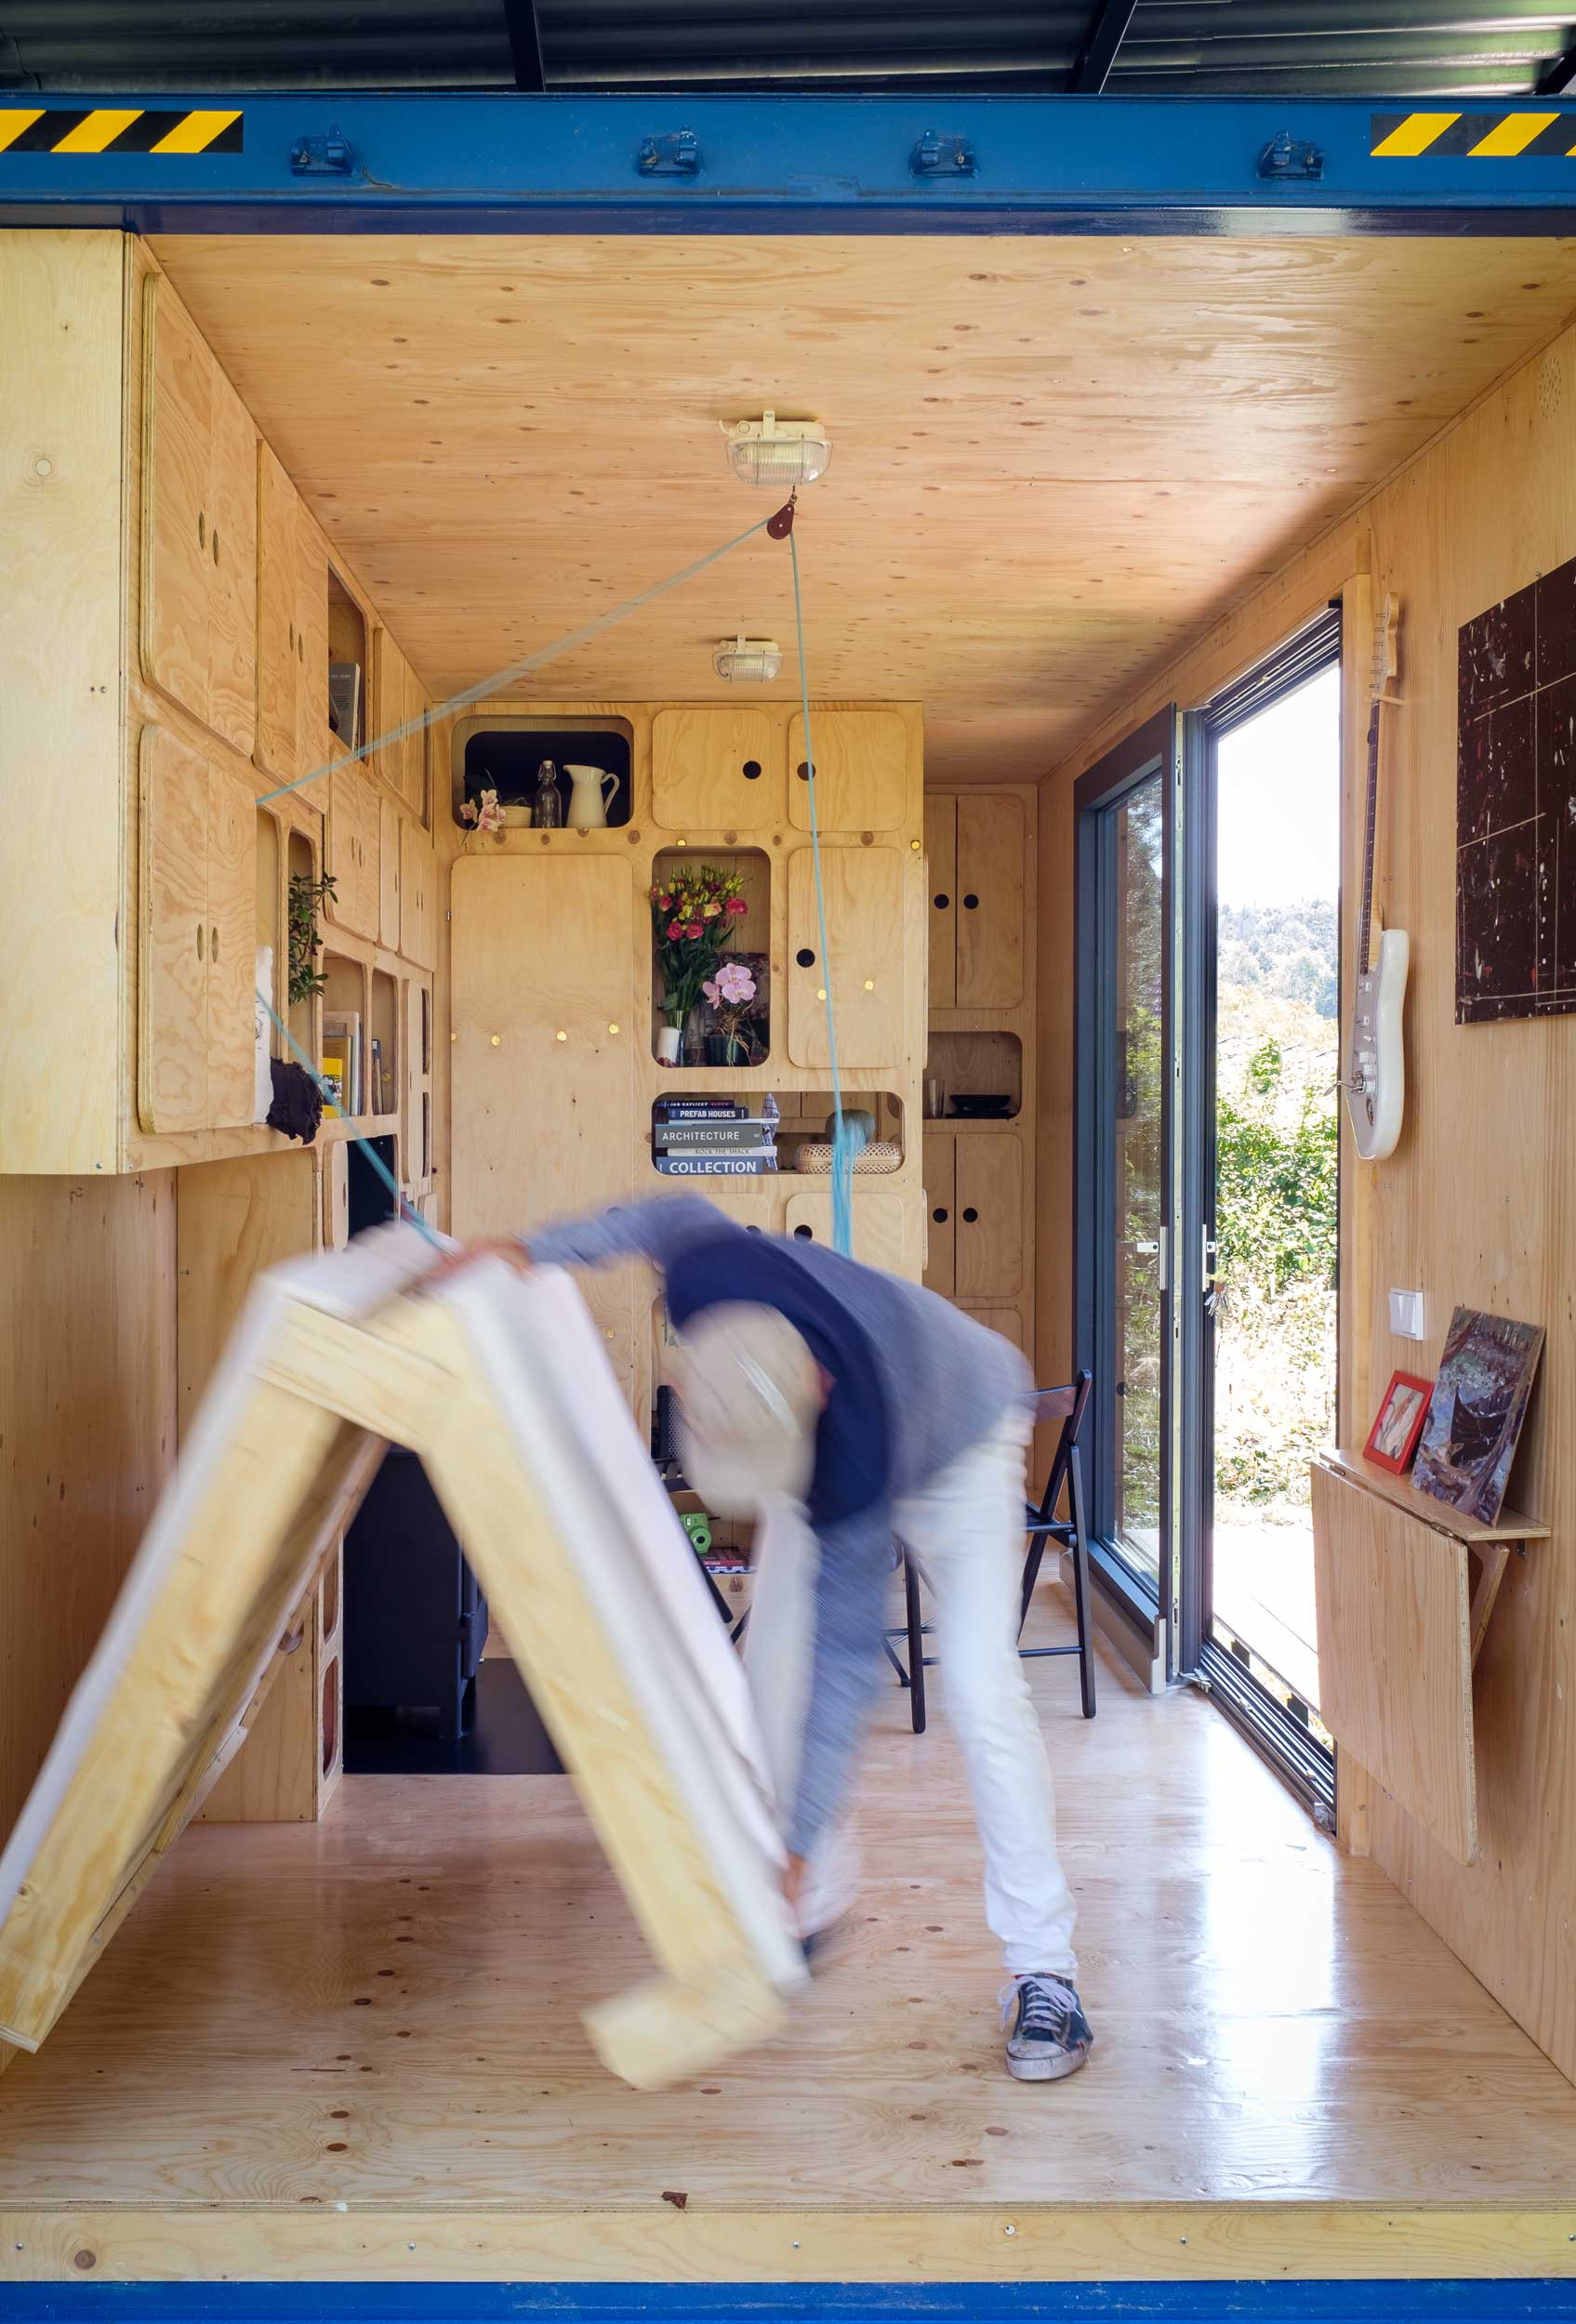 https://www.pinuphouses.com/wp-content/uploads/container-house-foldable-bed.jpg